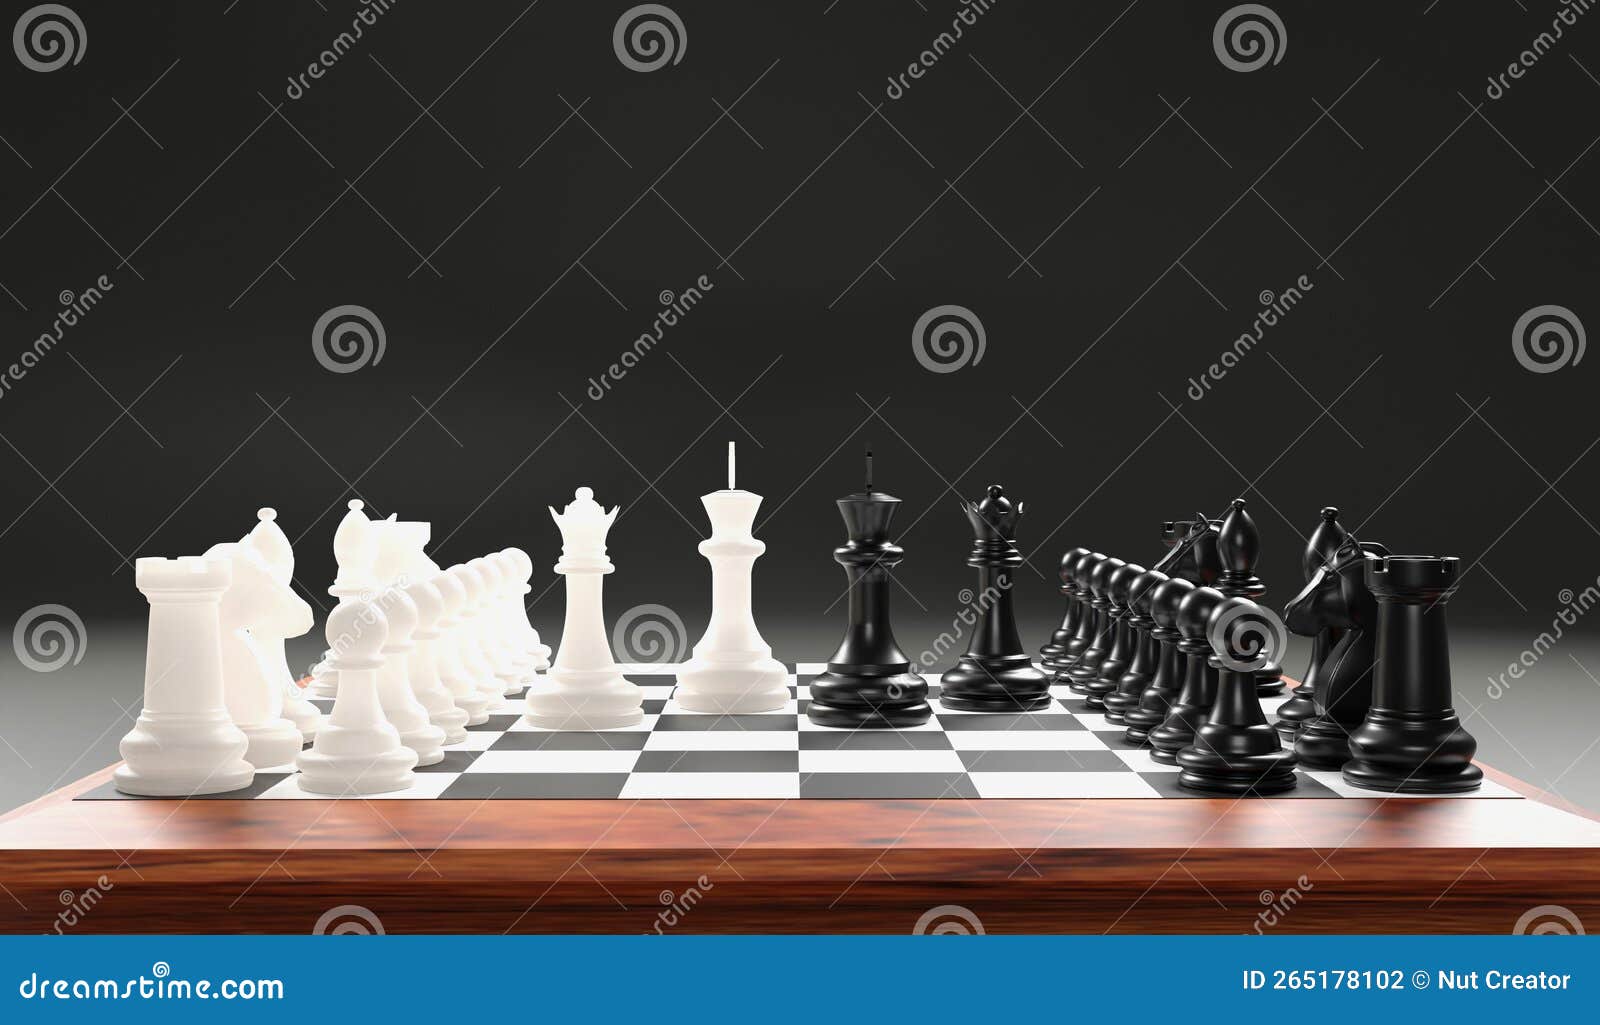 1080p hd Photos 3d.  Chess board, Black and white wallpaper, Chess